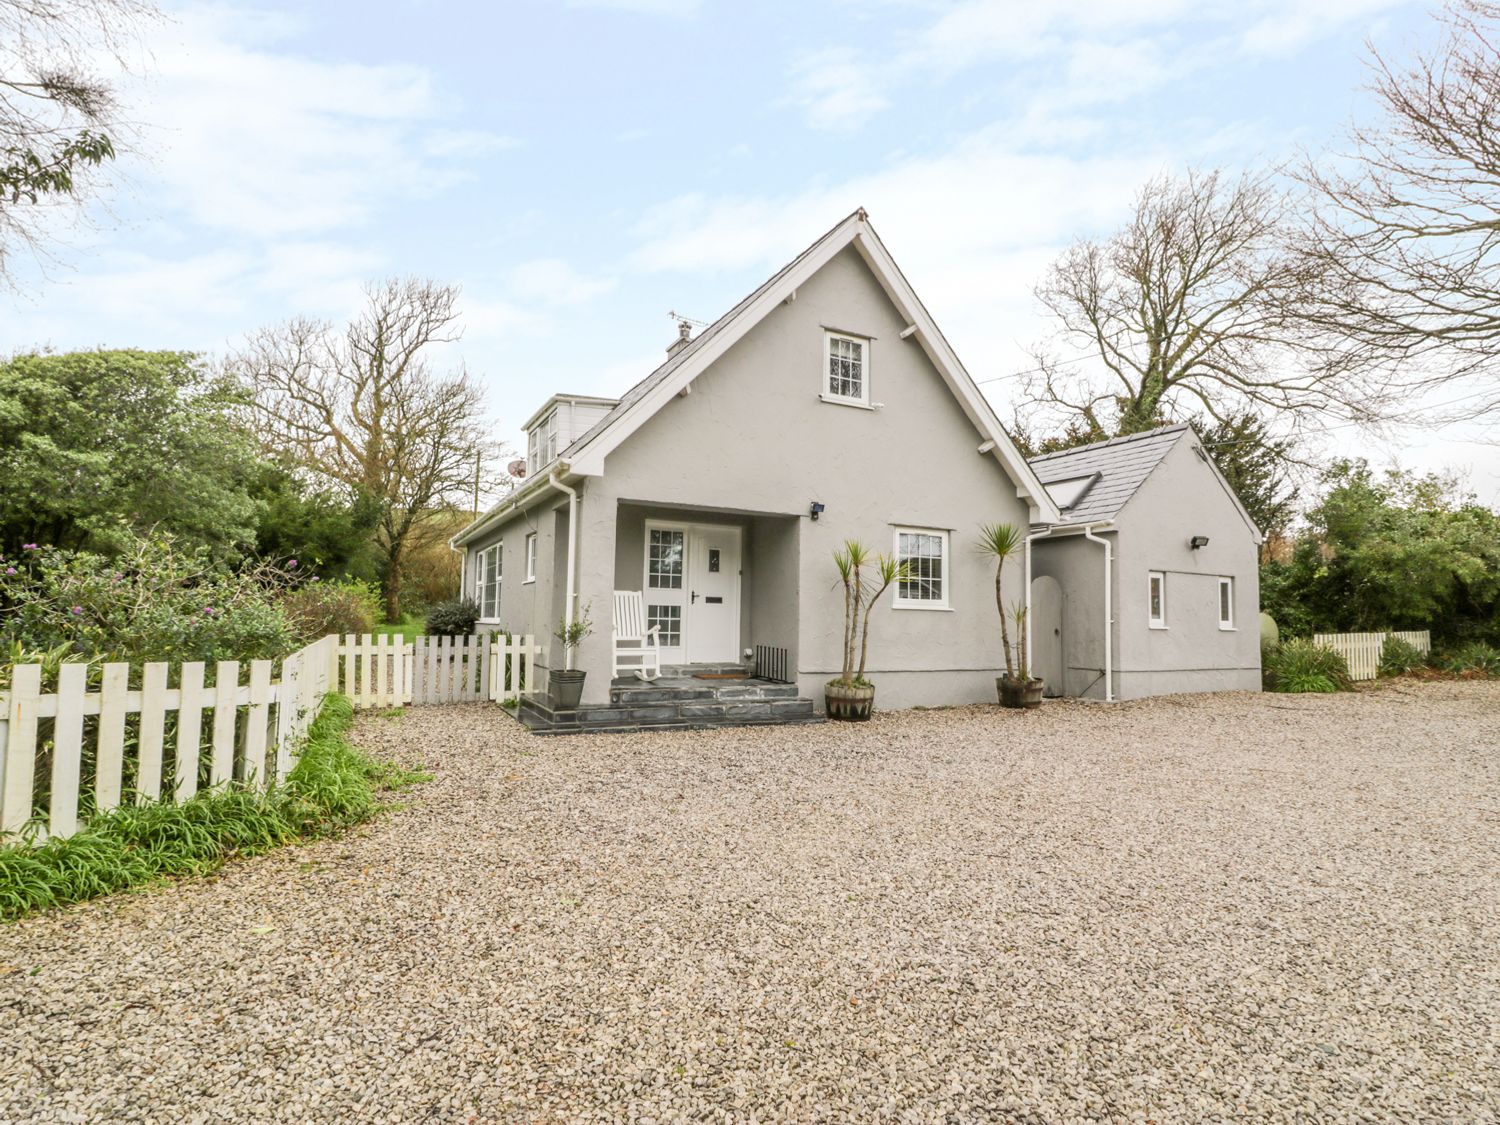 4 bedroom Cottage for rent in Abersoch